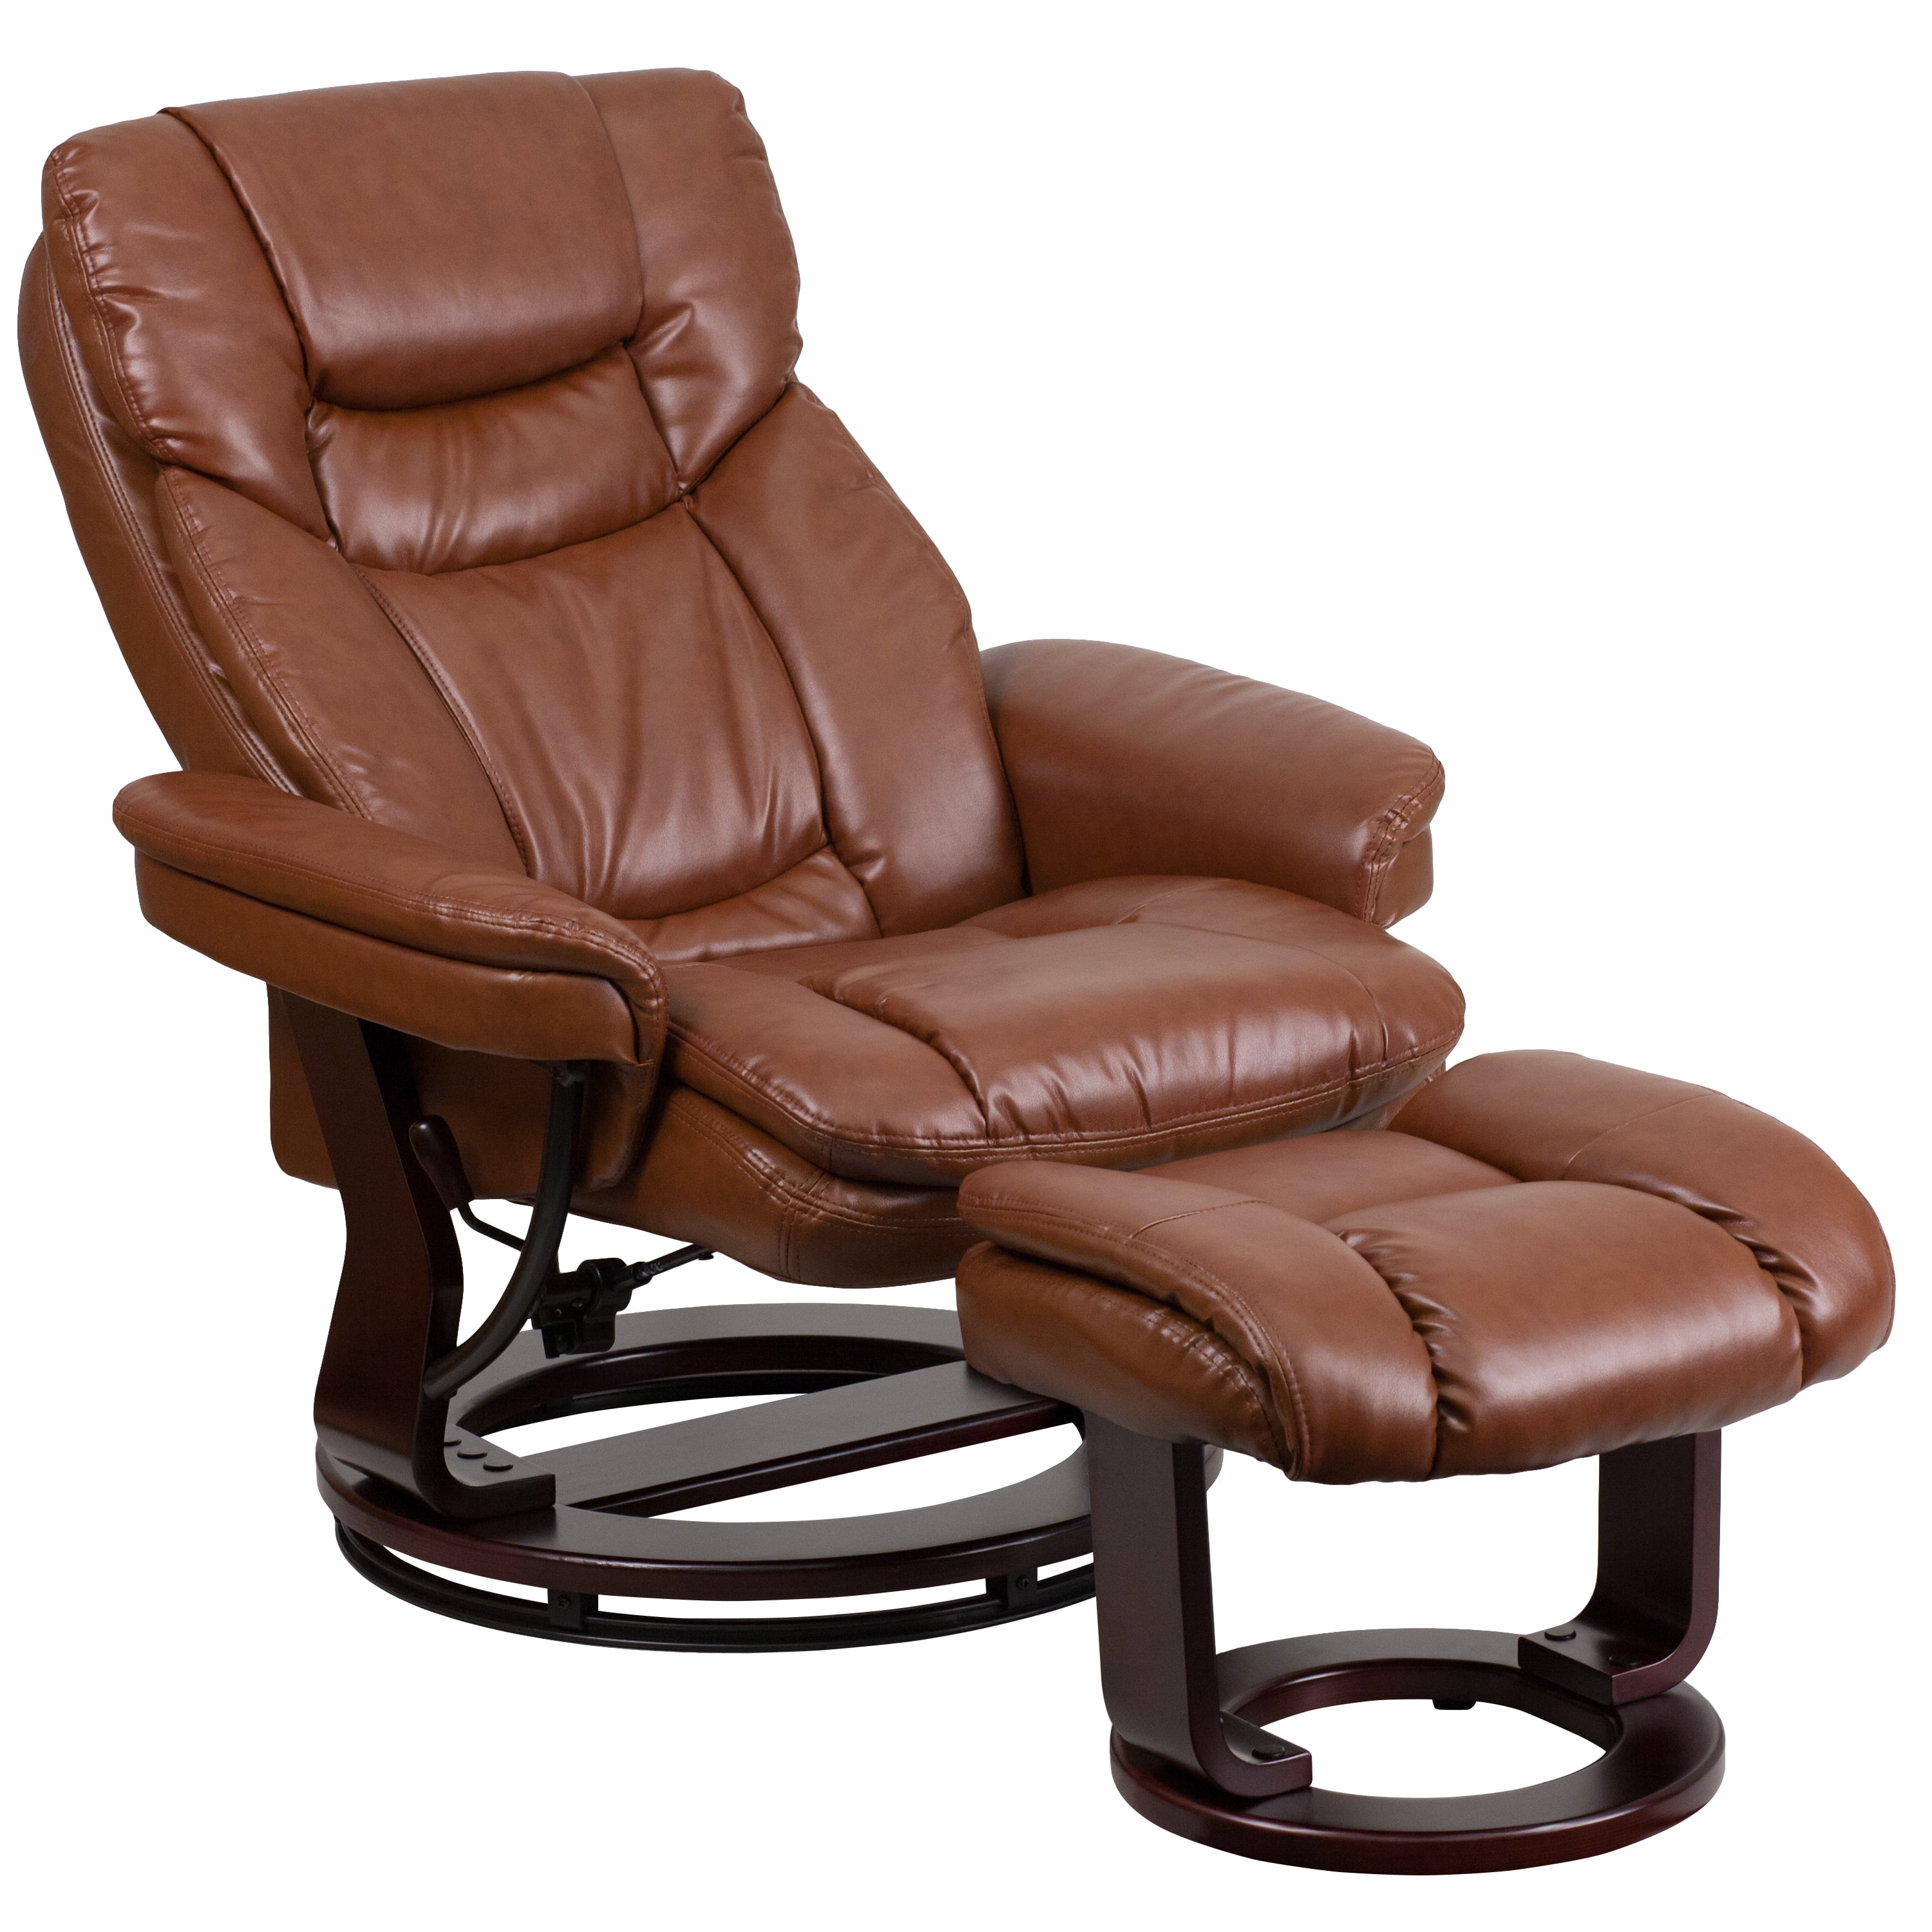 woods deluxe rv chair